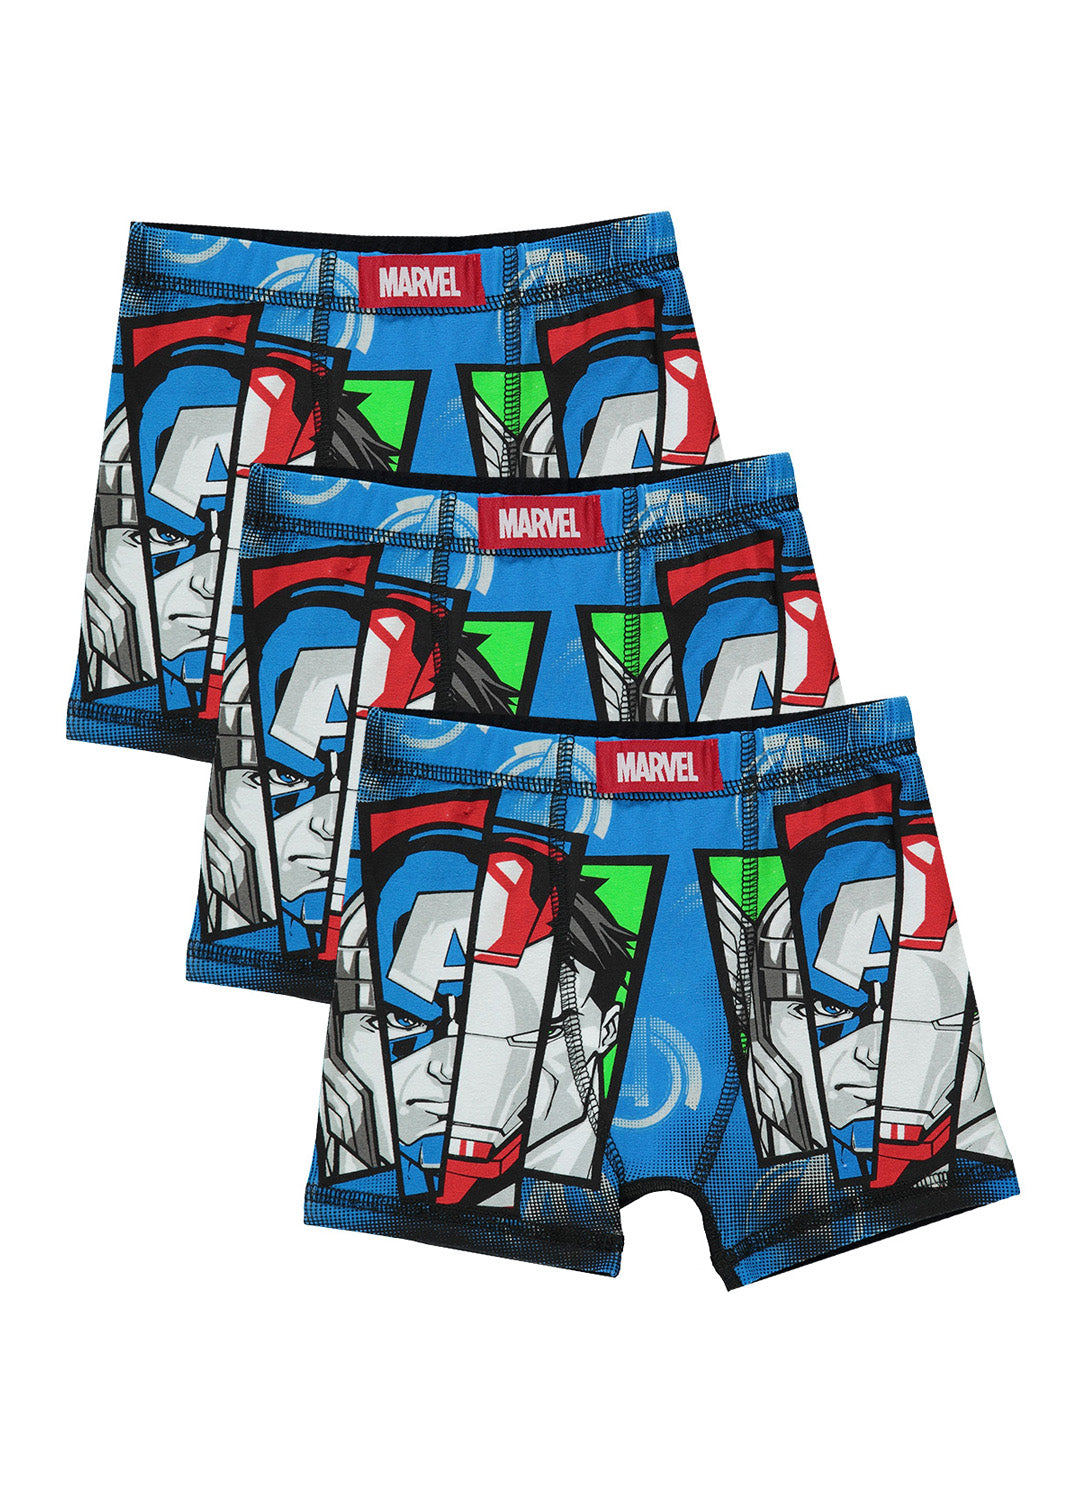 Boys trunks  set of 3 with a colorful design of several Avengers characters